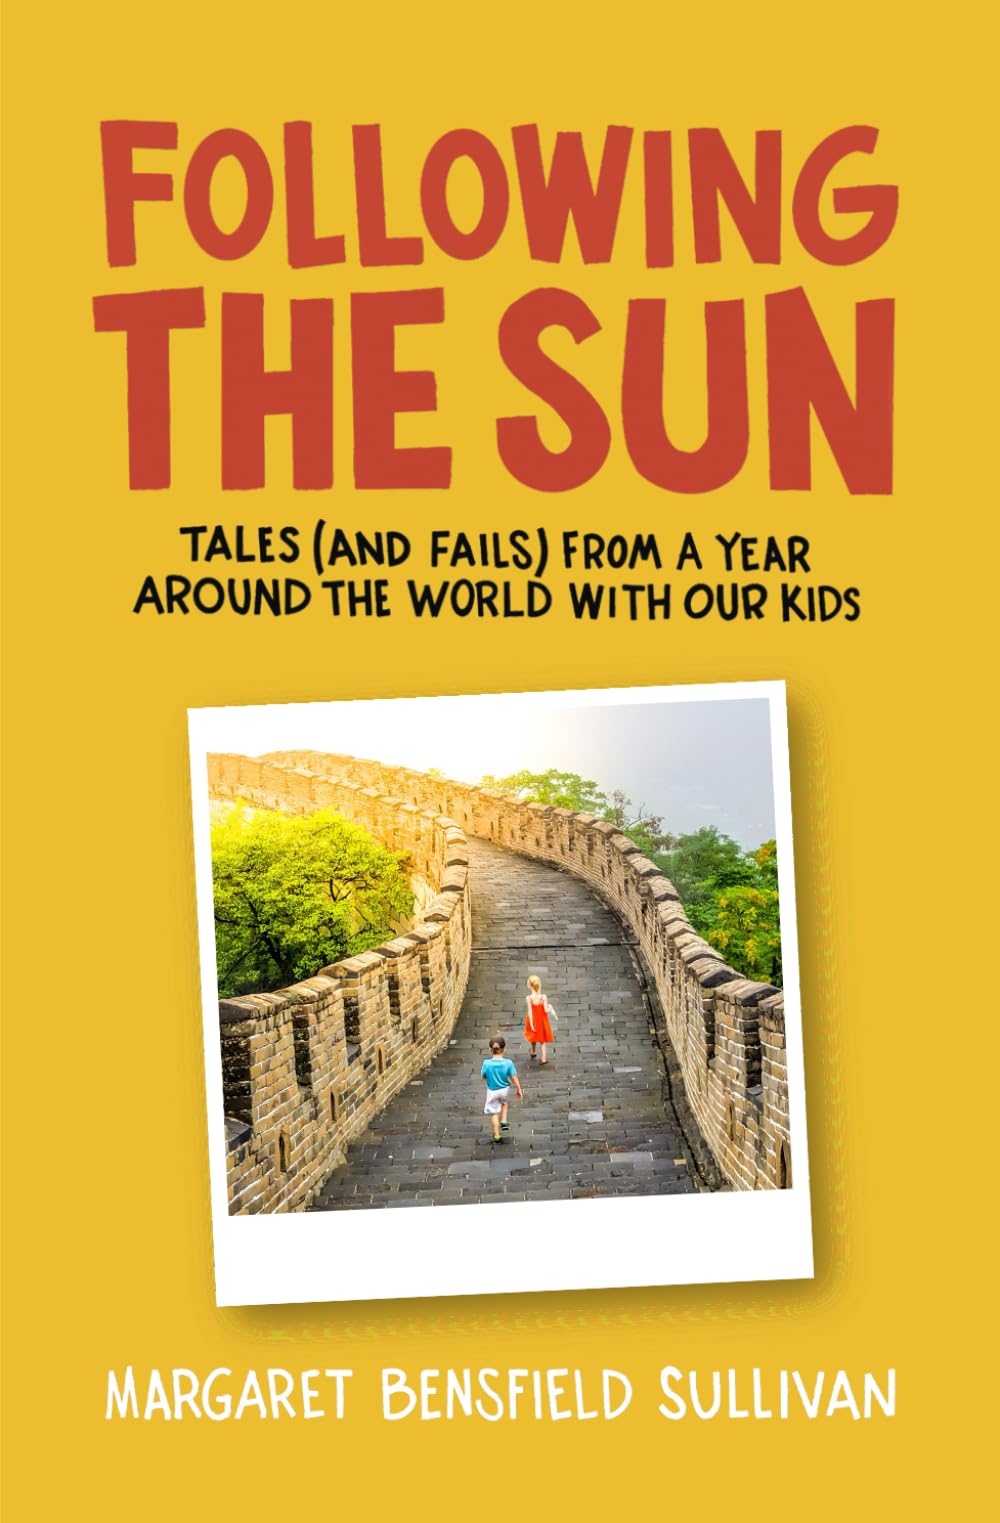 Following the Sun: Tales (and Fails) From a Year Around the World With Our Kids